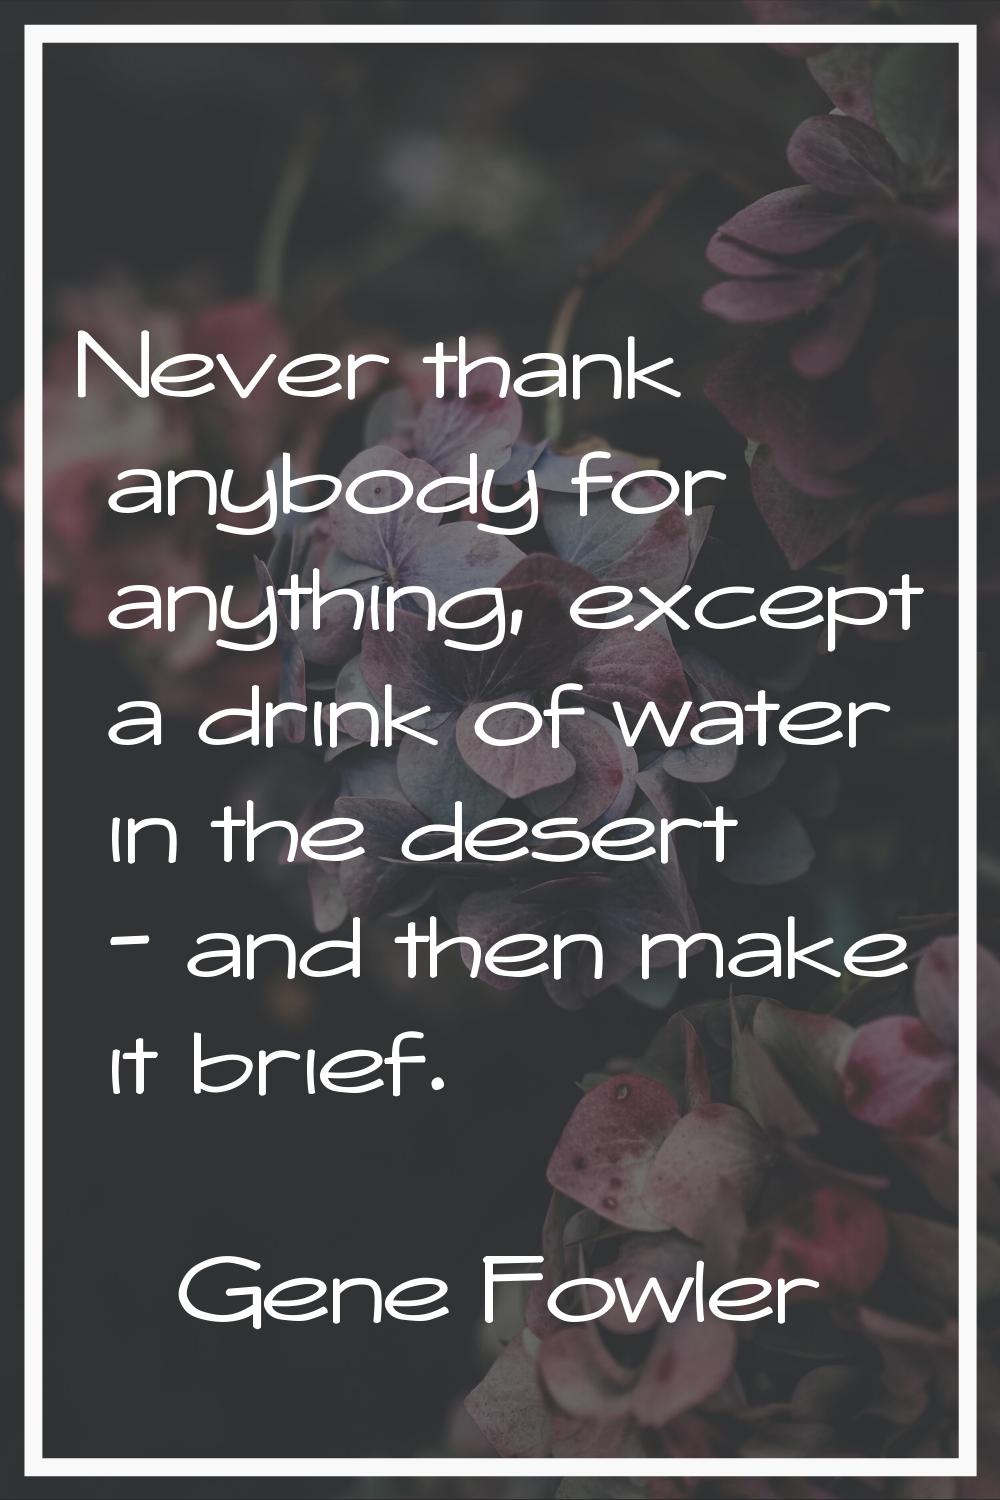 Never thank anybody for anything, except a drink of water in the desert - and then make it brief.